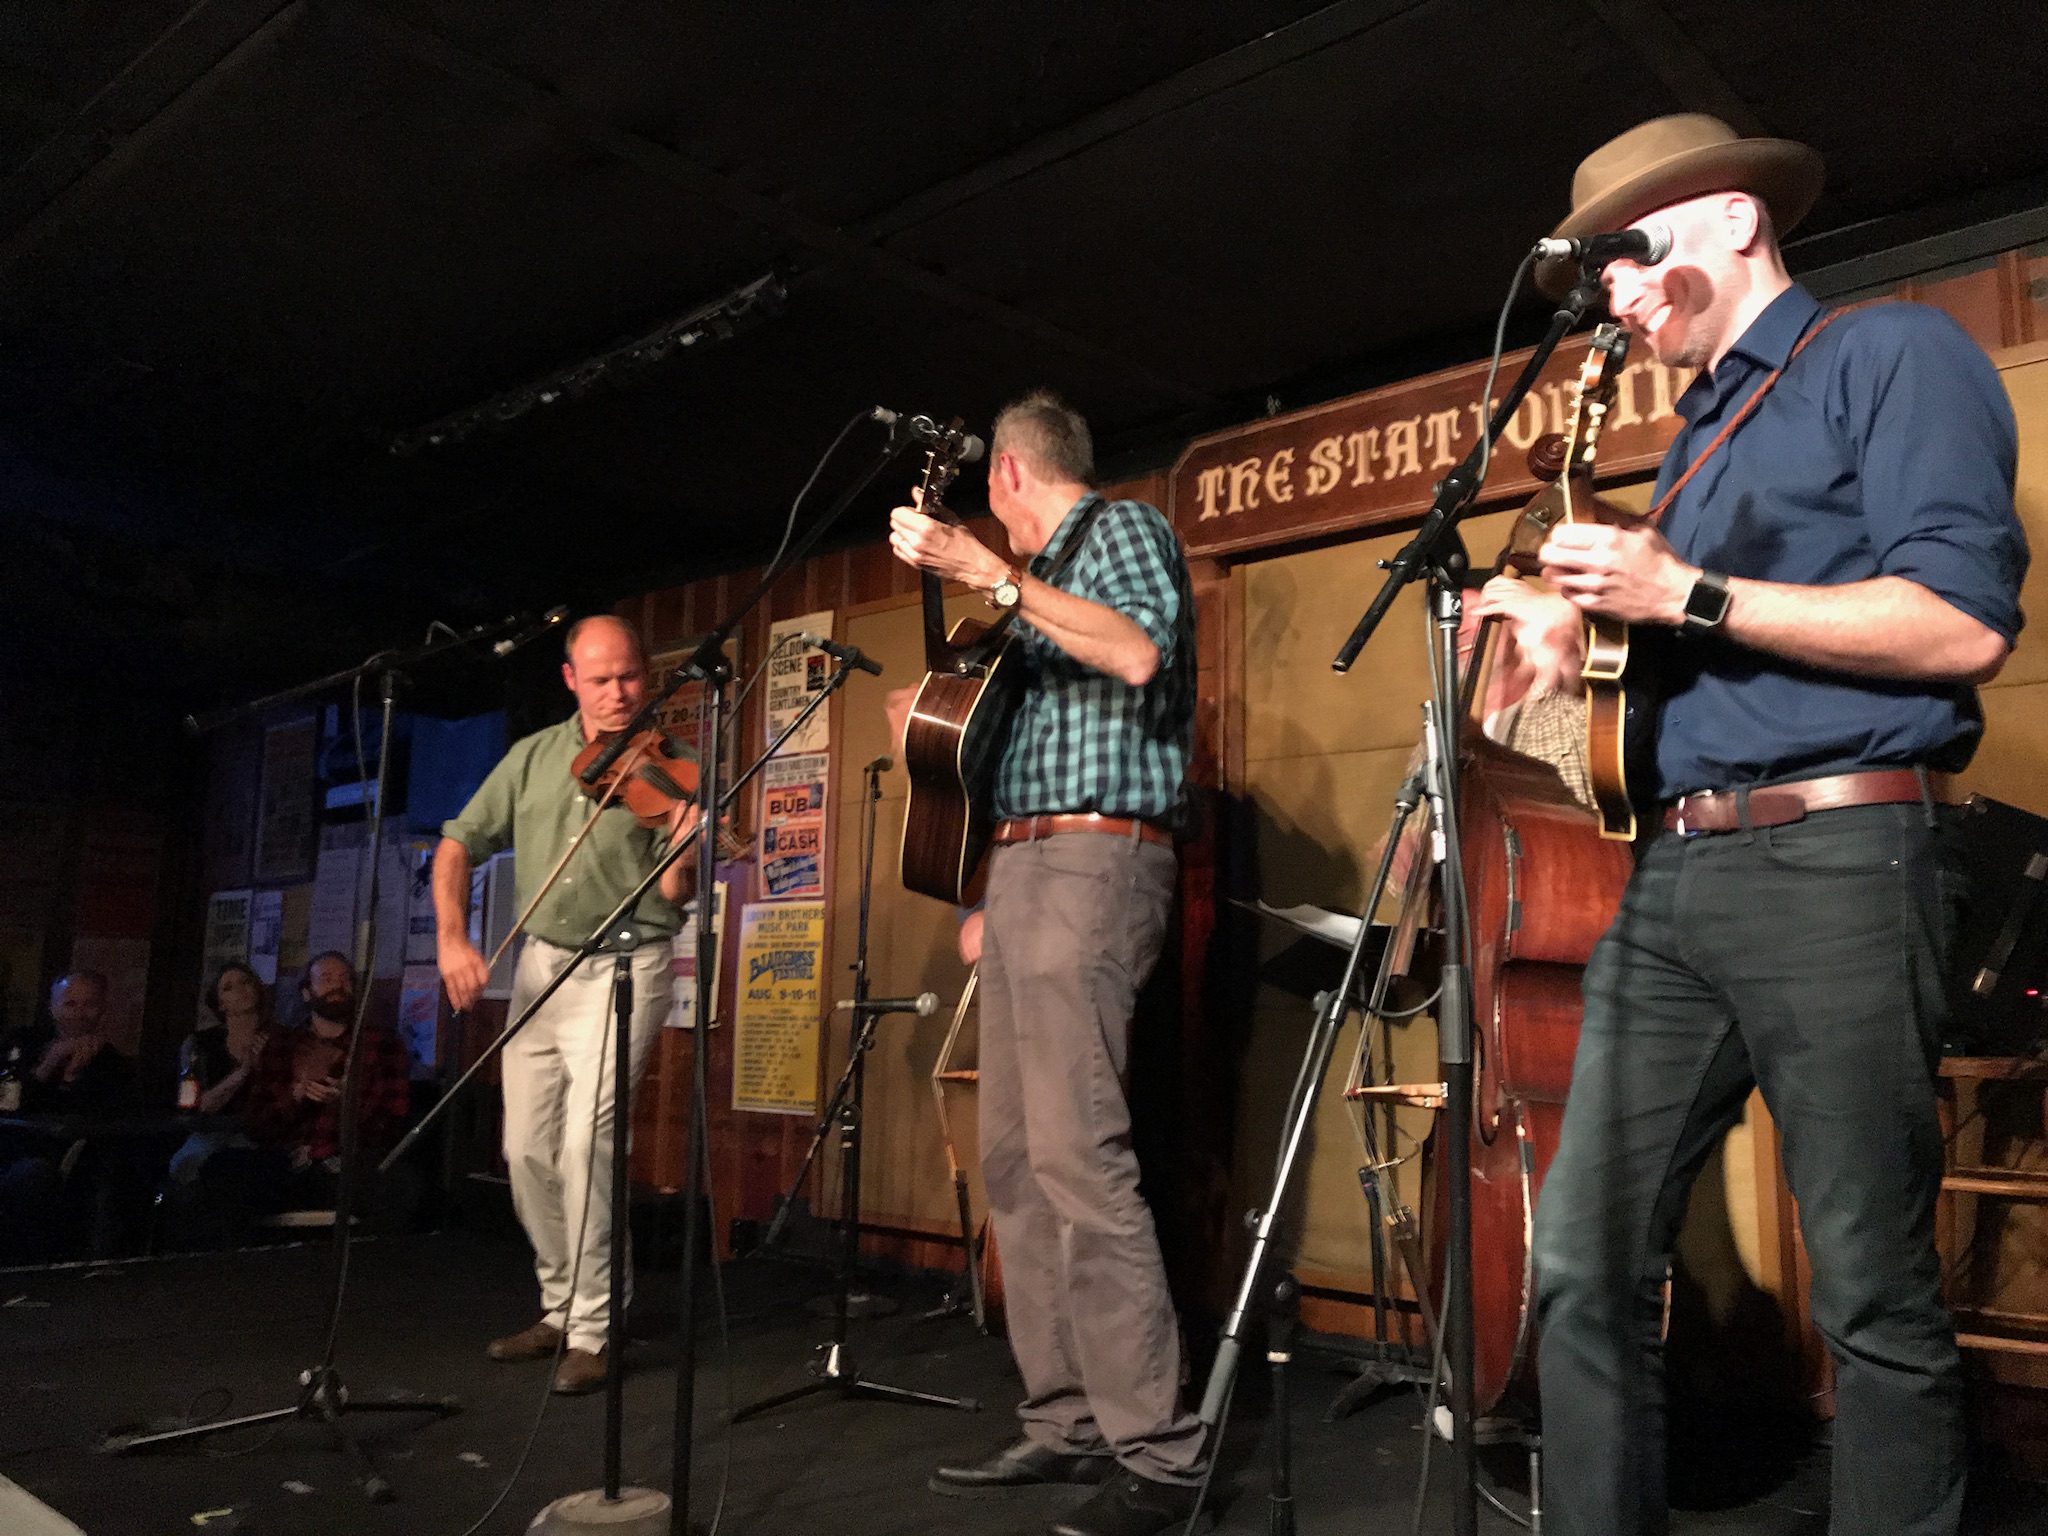 The band (L-R: Shad Cobb, Robbie Fulks, Todd Phillips, Scott Simontacchi) having fun.  Photo taken by and the property of FourWalls.